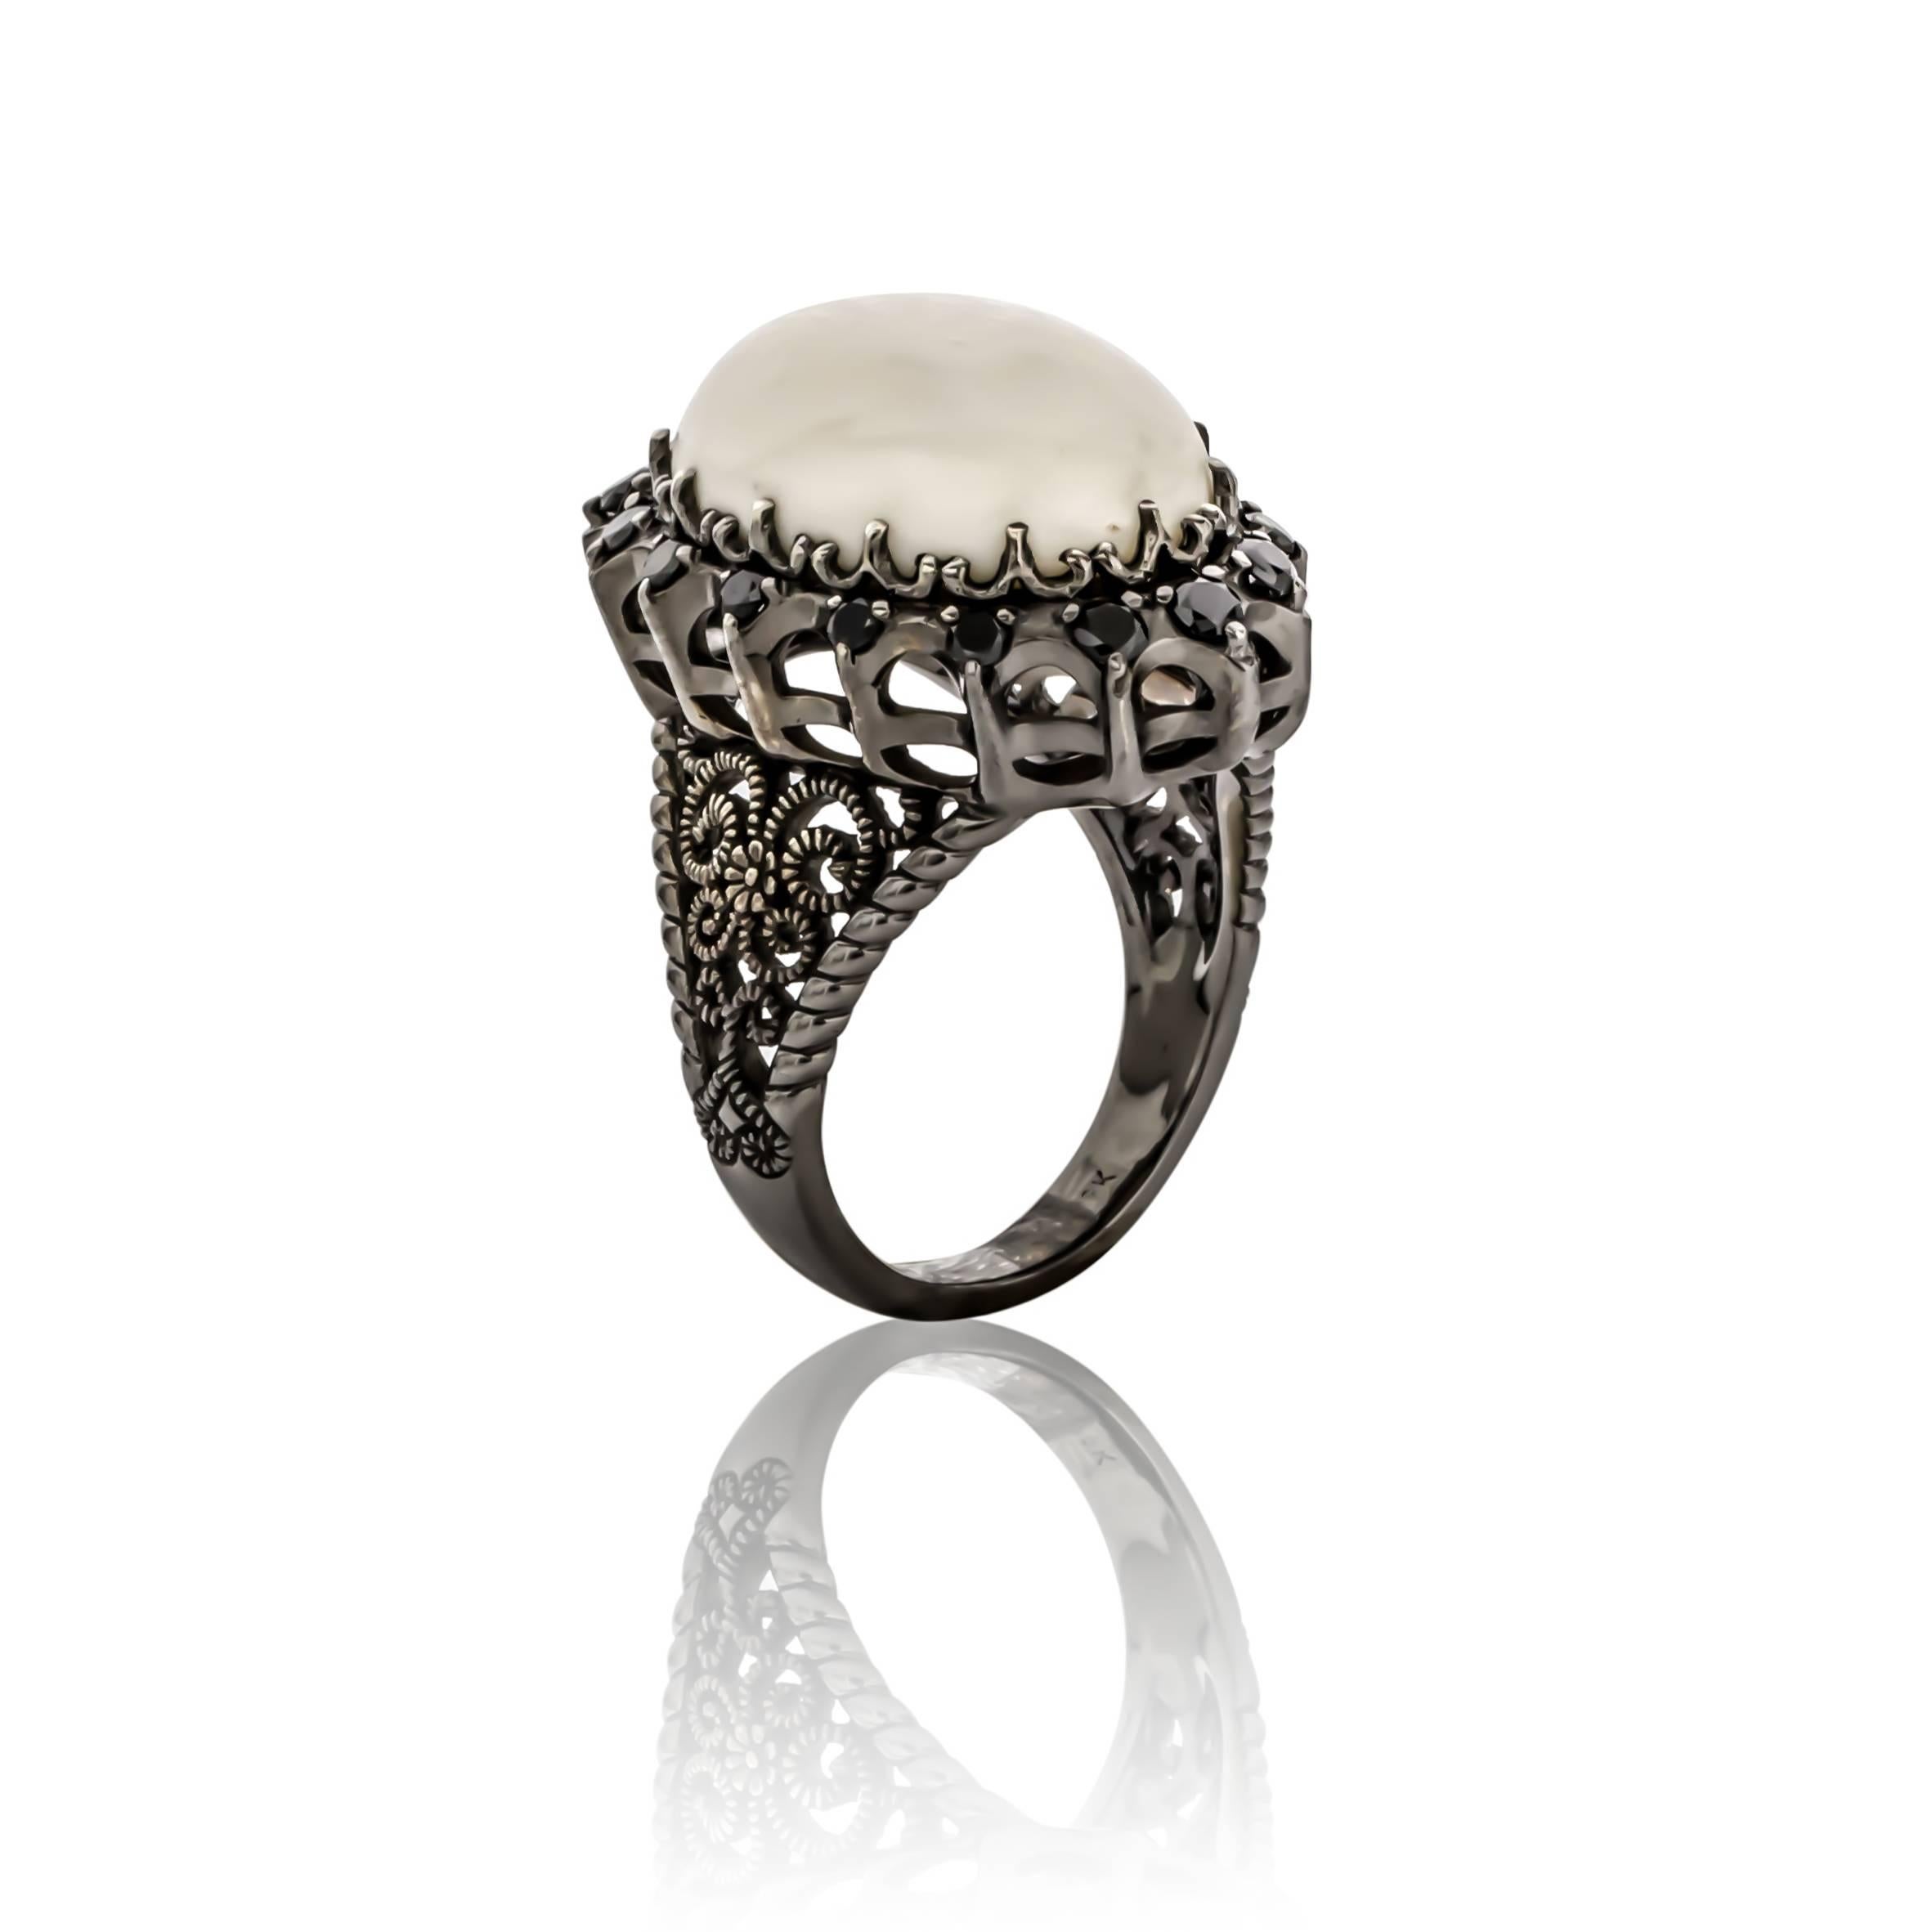 Cynthia Bach White Coral & Black Diamond Ring In Excellent Condition For Sale In Richardson, TX